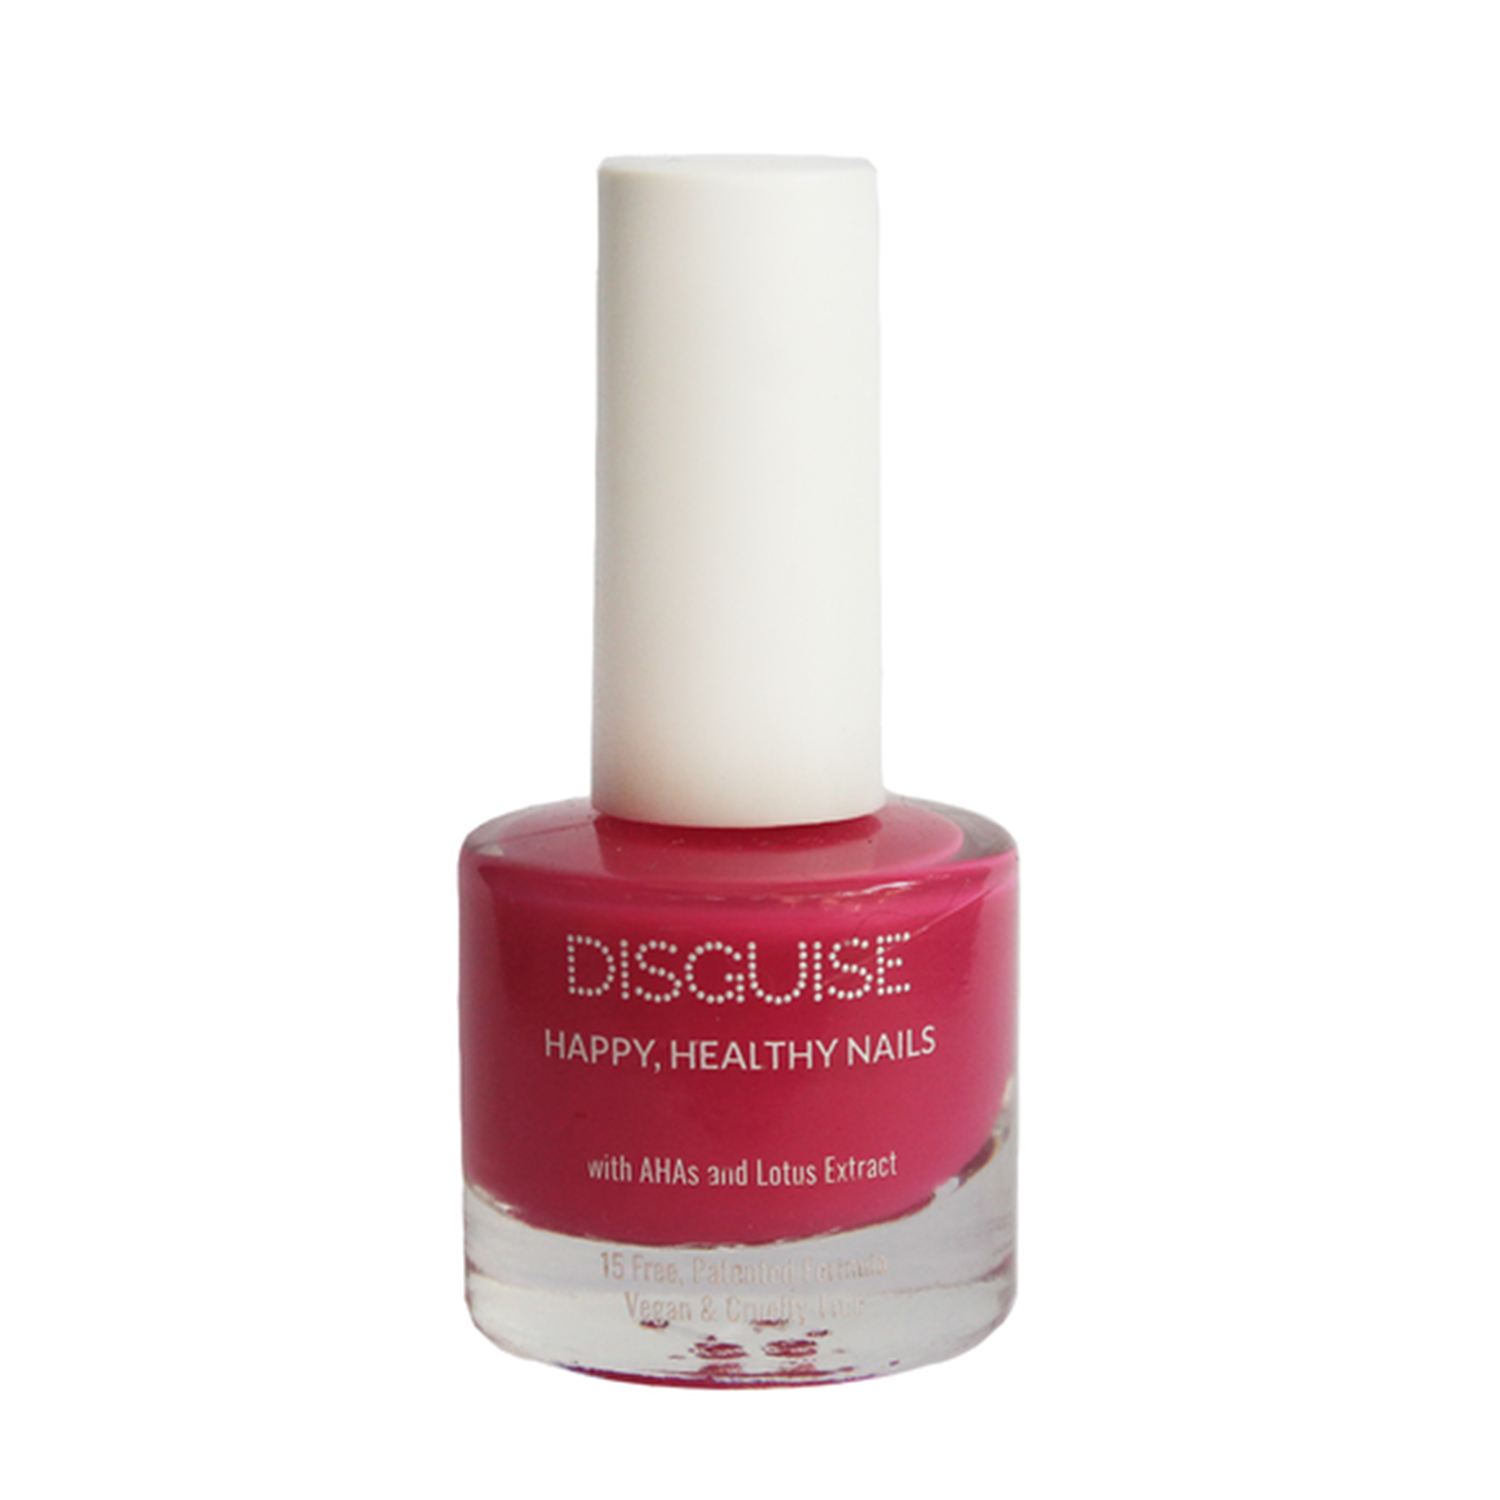 Disguise Cosmetics Happy, Healthy Nails, 9ml-106 Pinky Promise